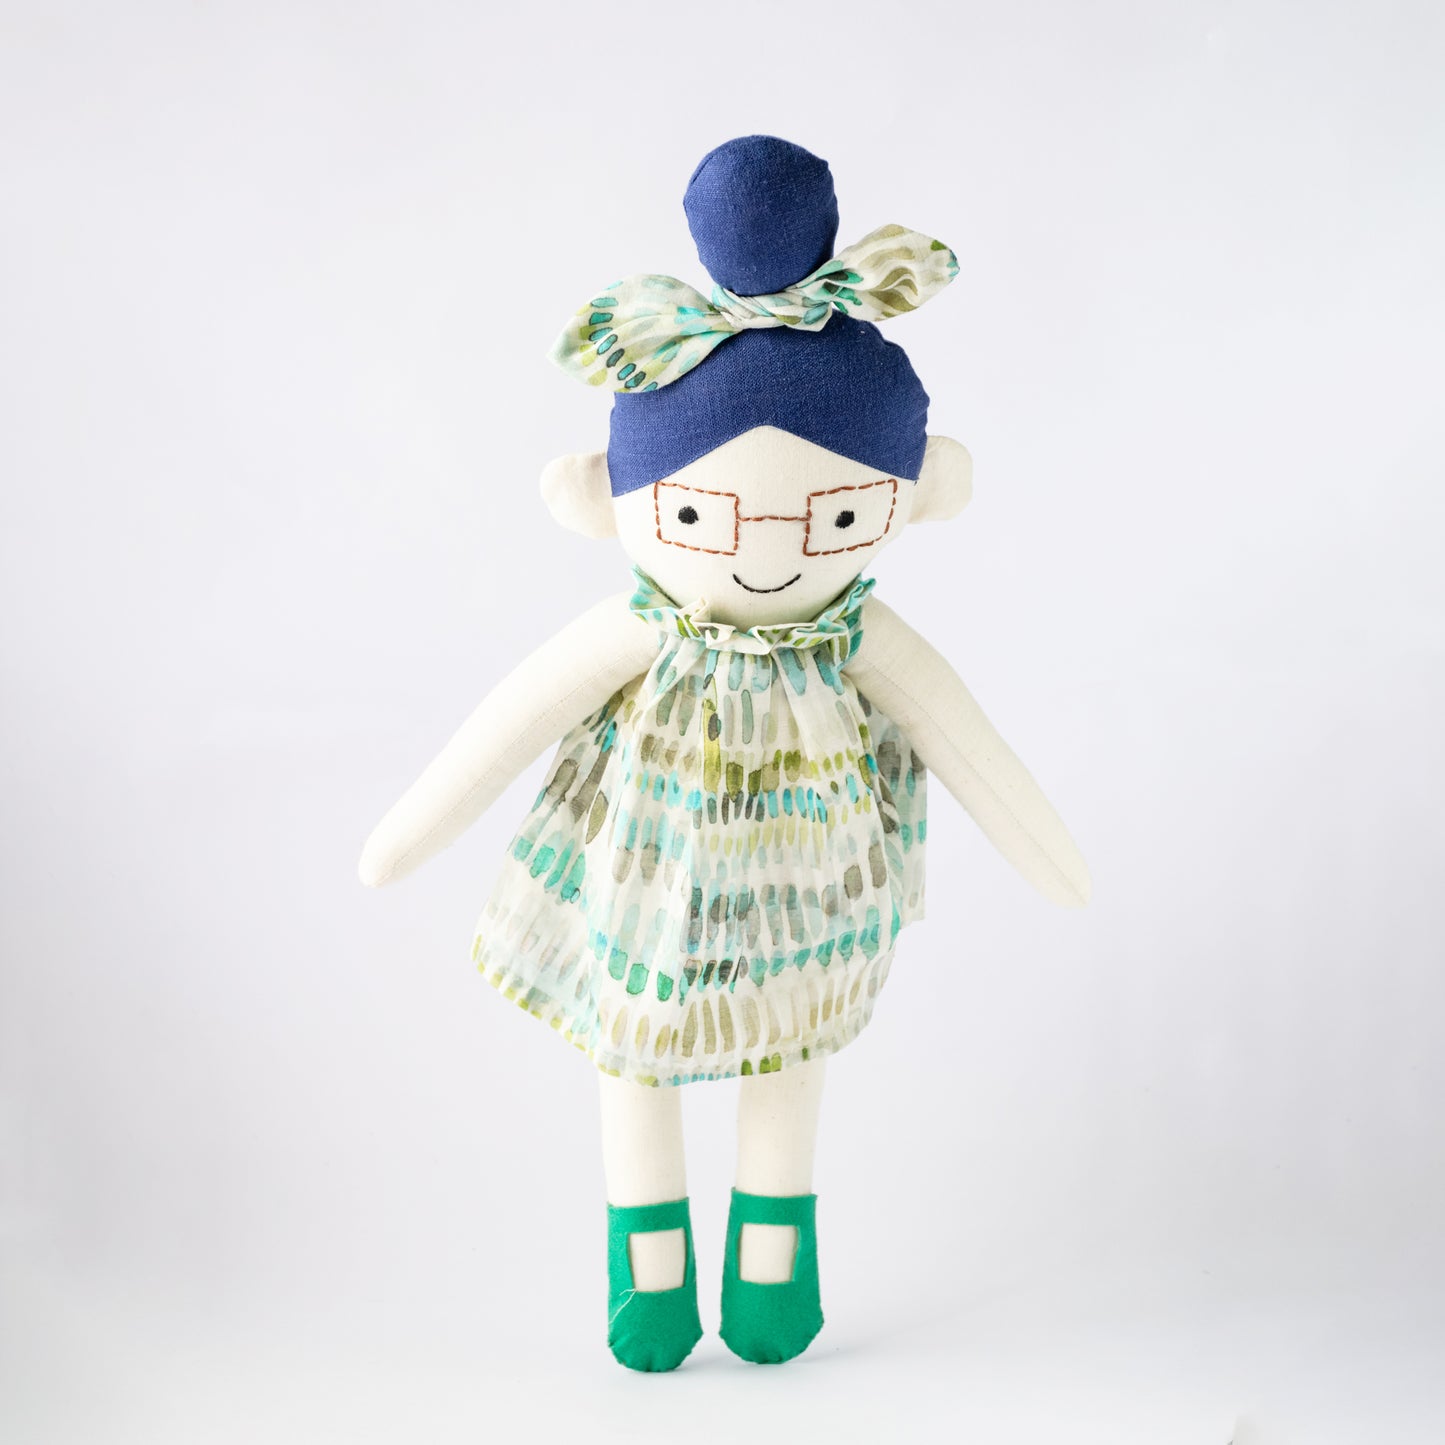 AMELIA - The Doll With Specs